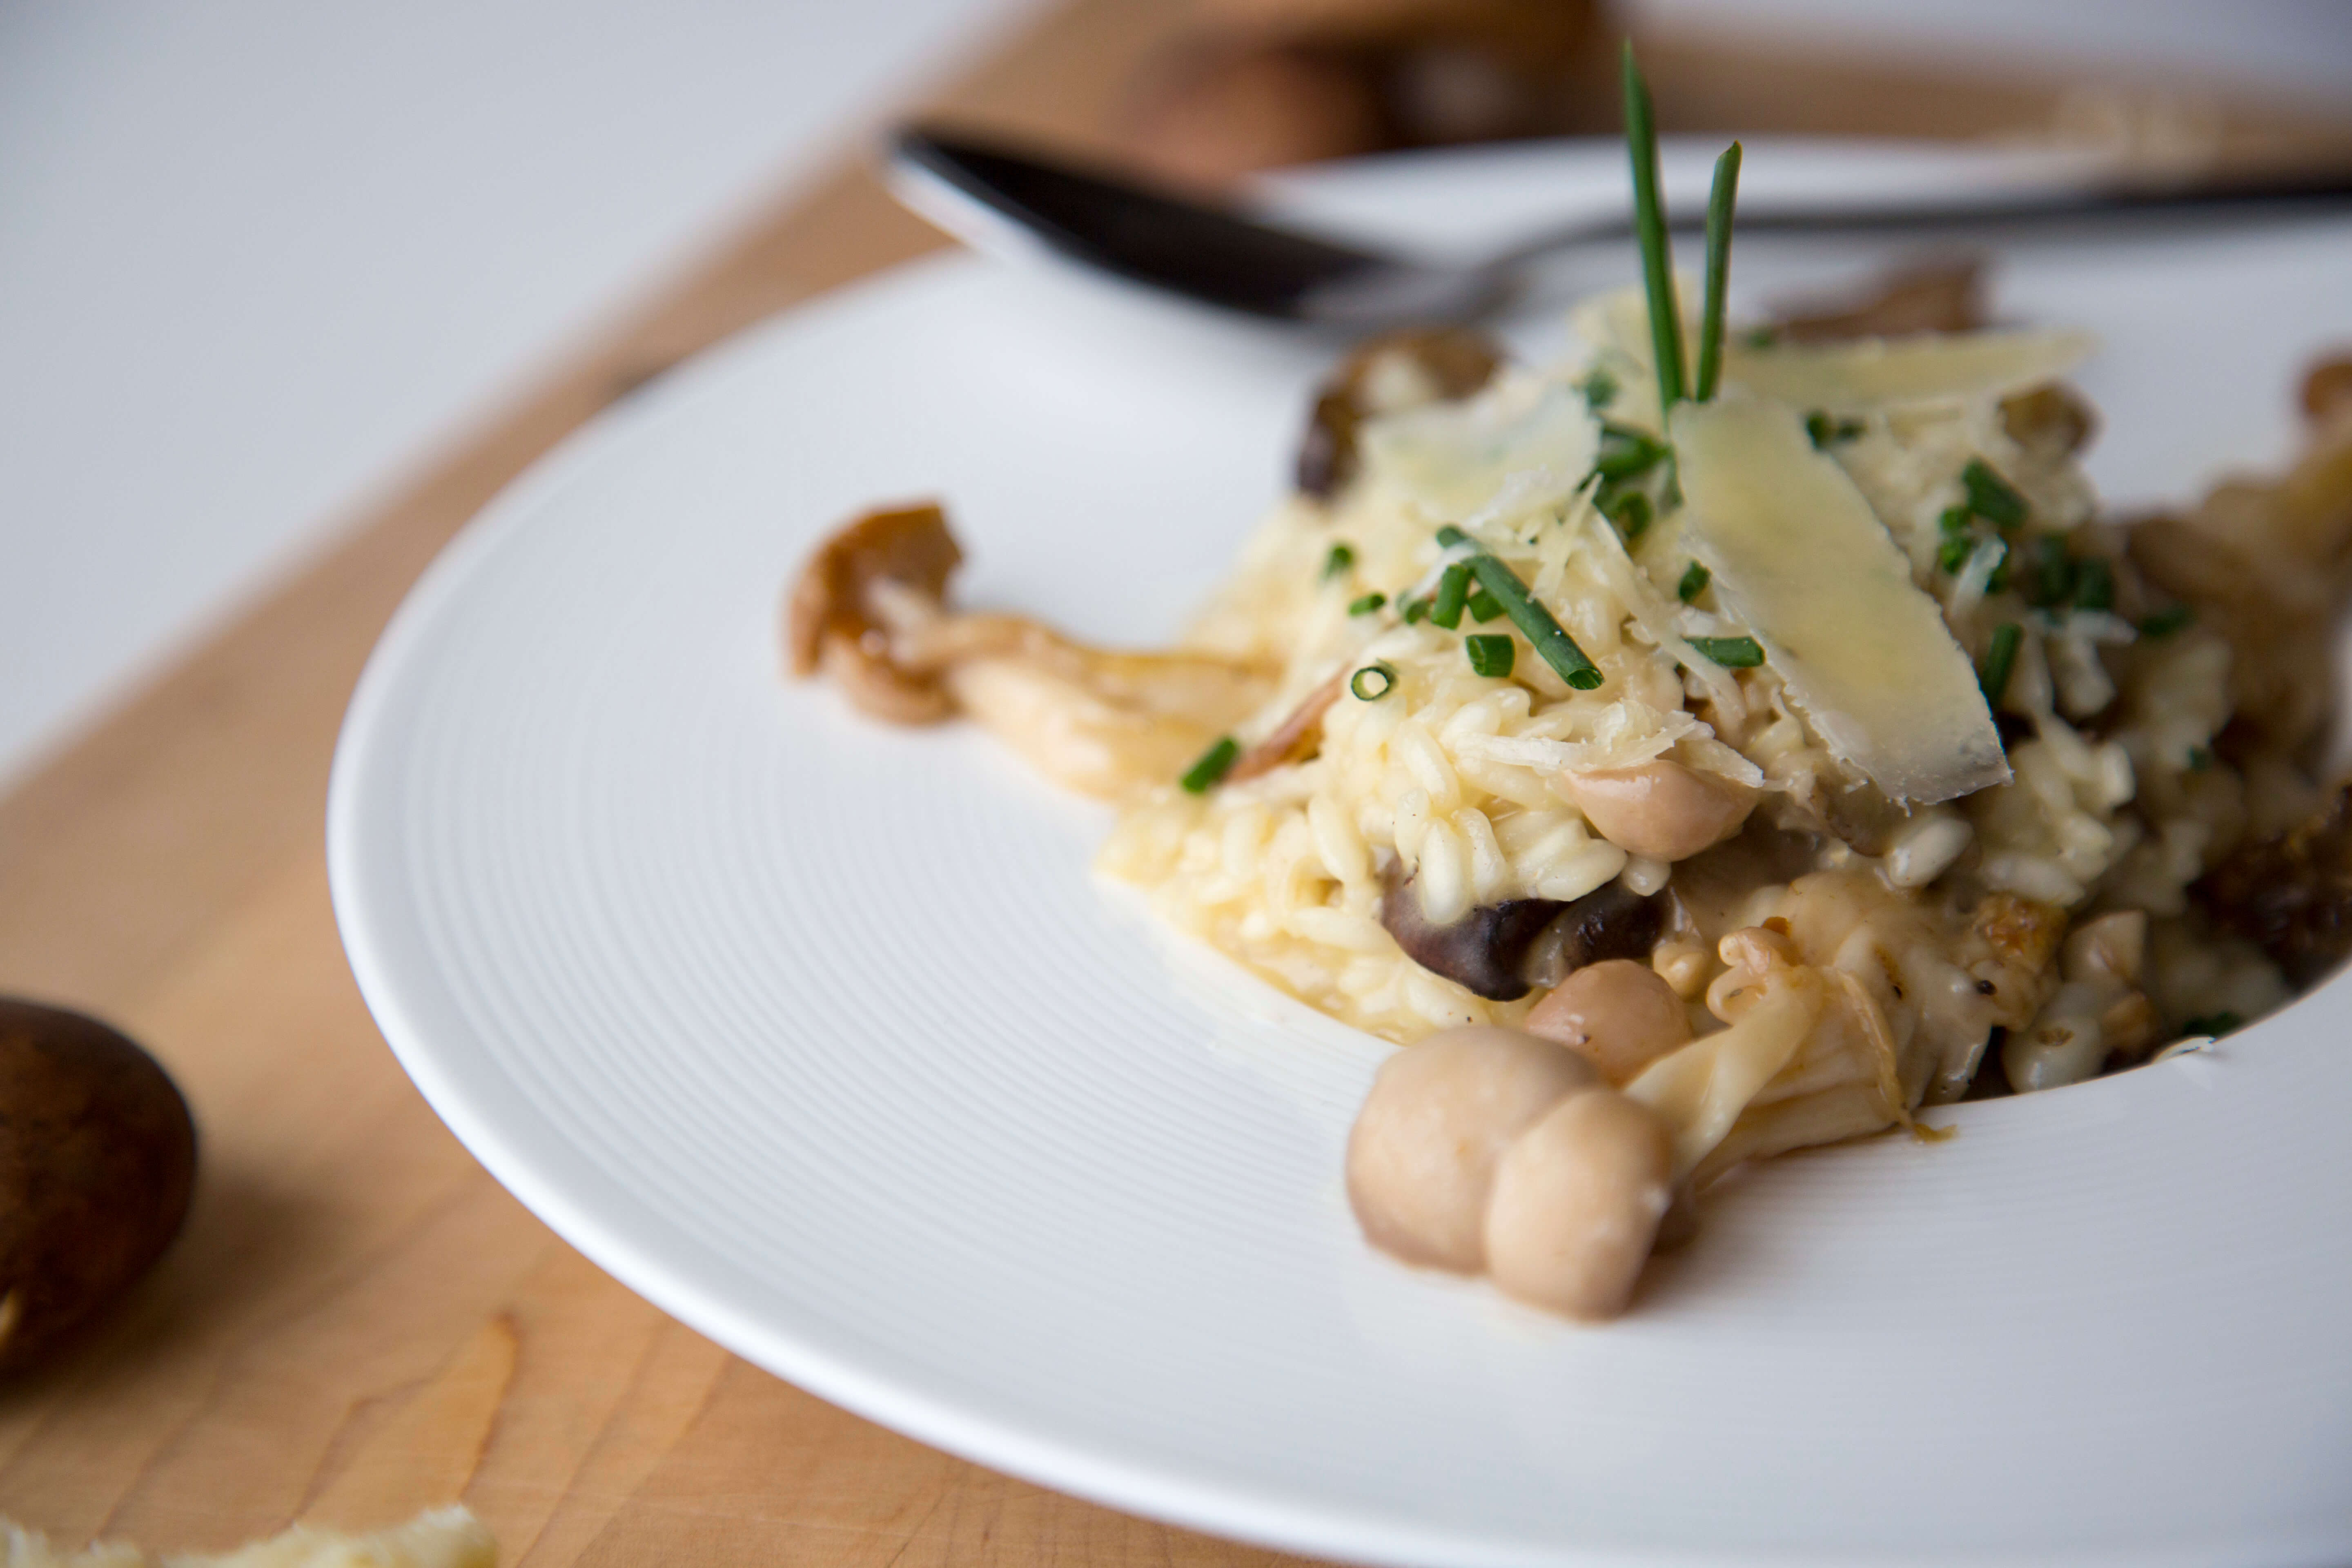 Porcini mushrooms make a great addition to risotto.